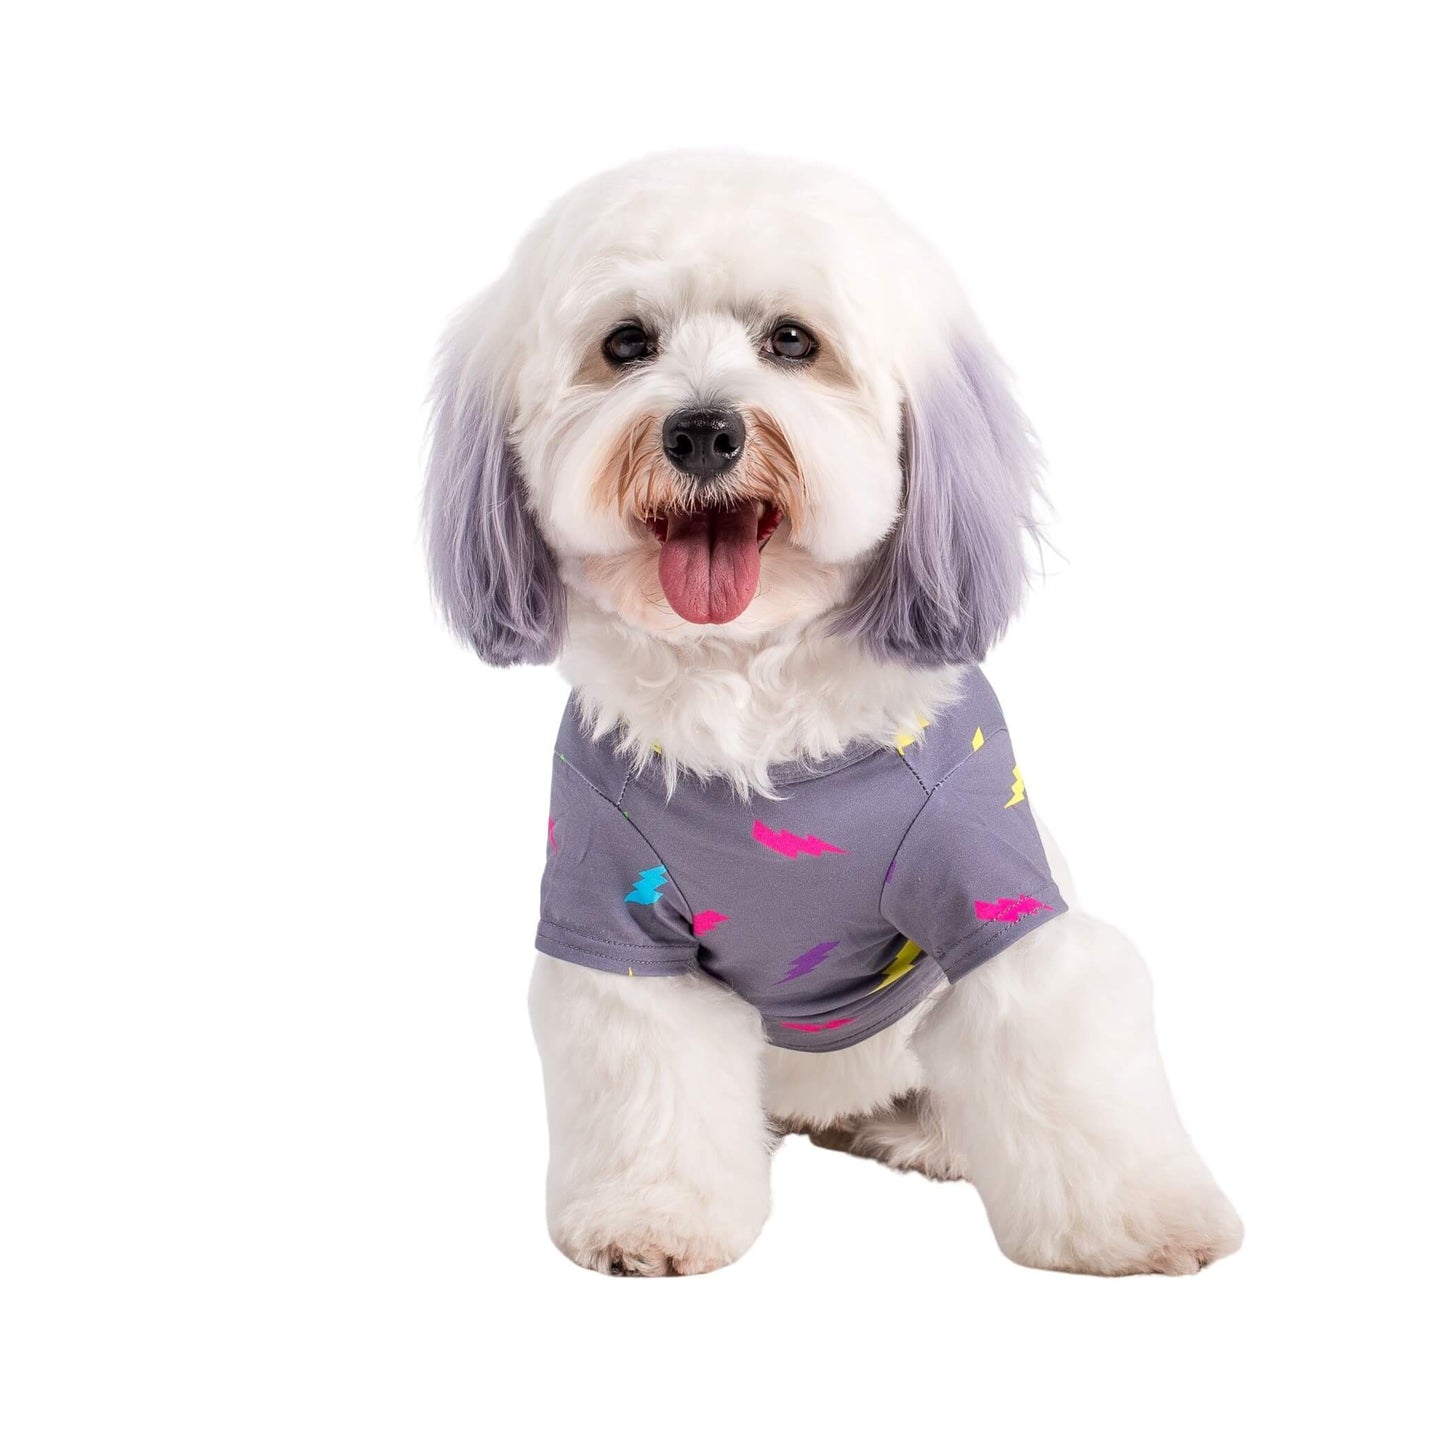 A cavoodle wearing Vibrant Hound's Electric Energy dog shirt.